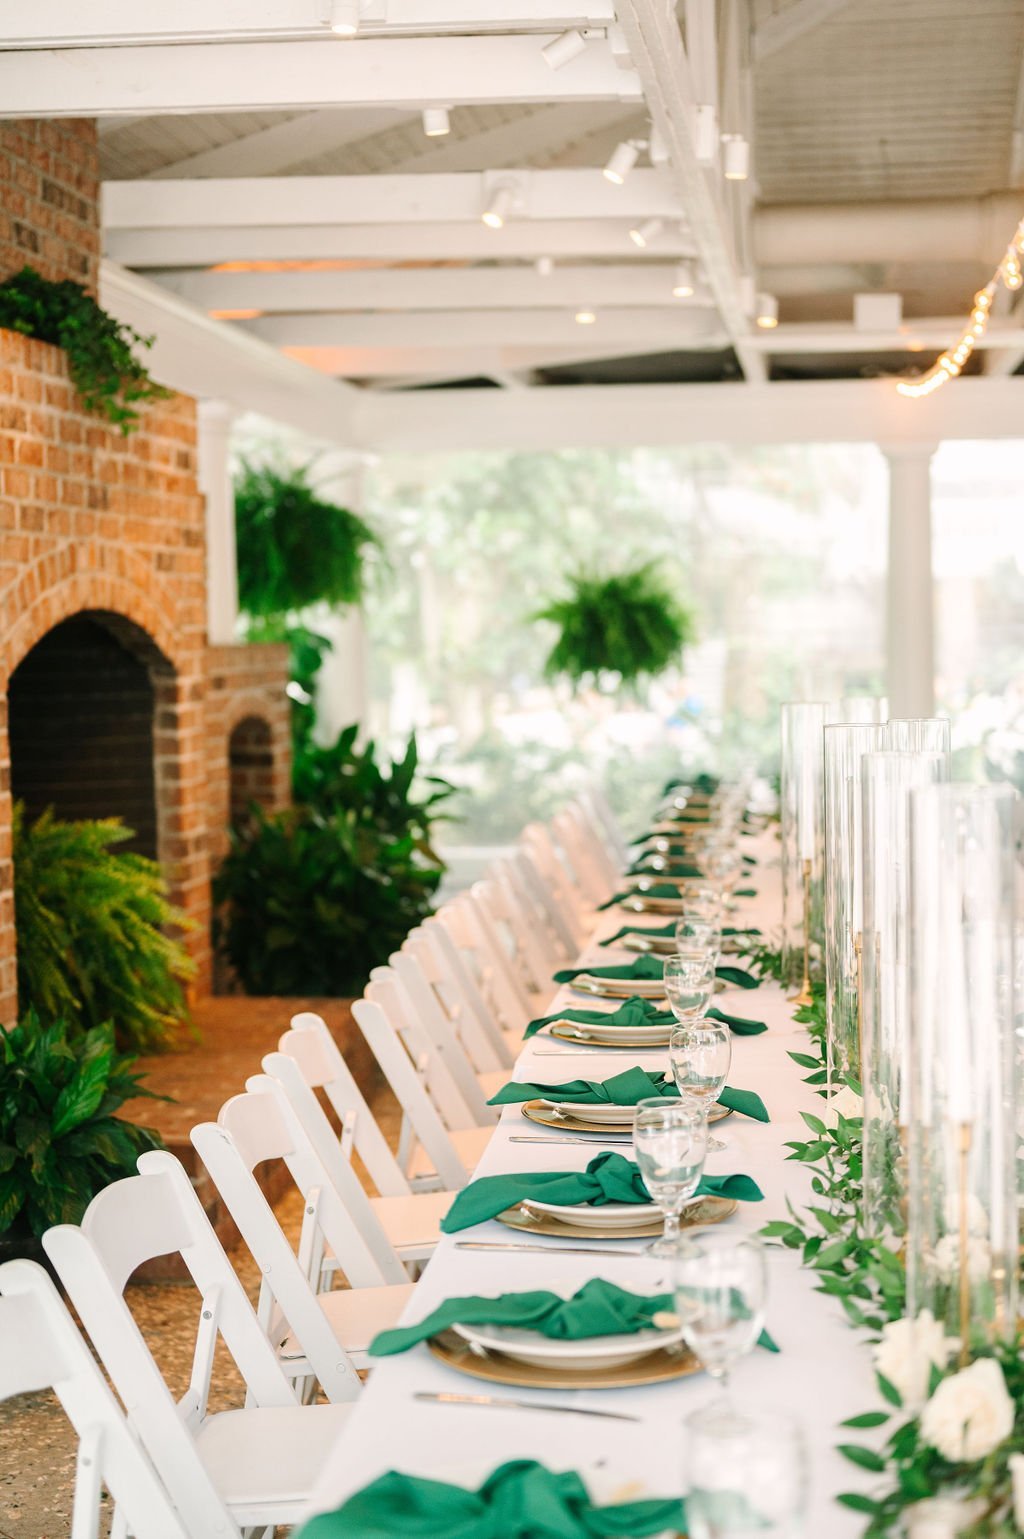 ashlyn-and-conors-chic-southern-summer-wedding-at-the-mackey-house-in-savannah-ga-featuring-bright-airy-fun-florals-by-savannah-florist-ivory-and-beau-29.jpg